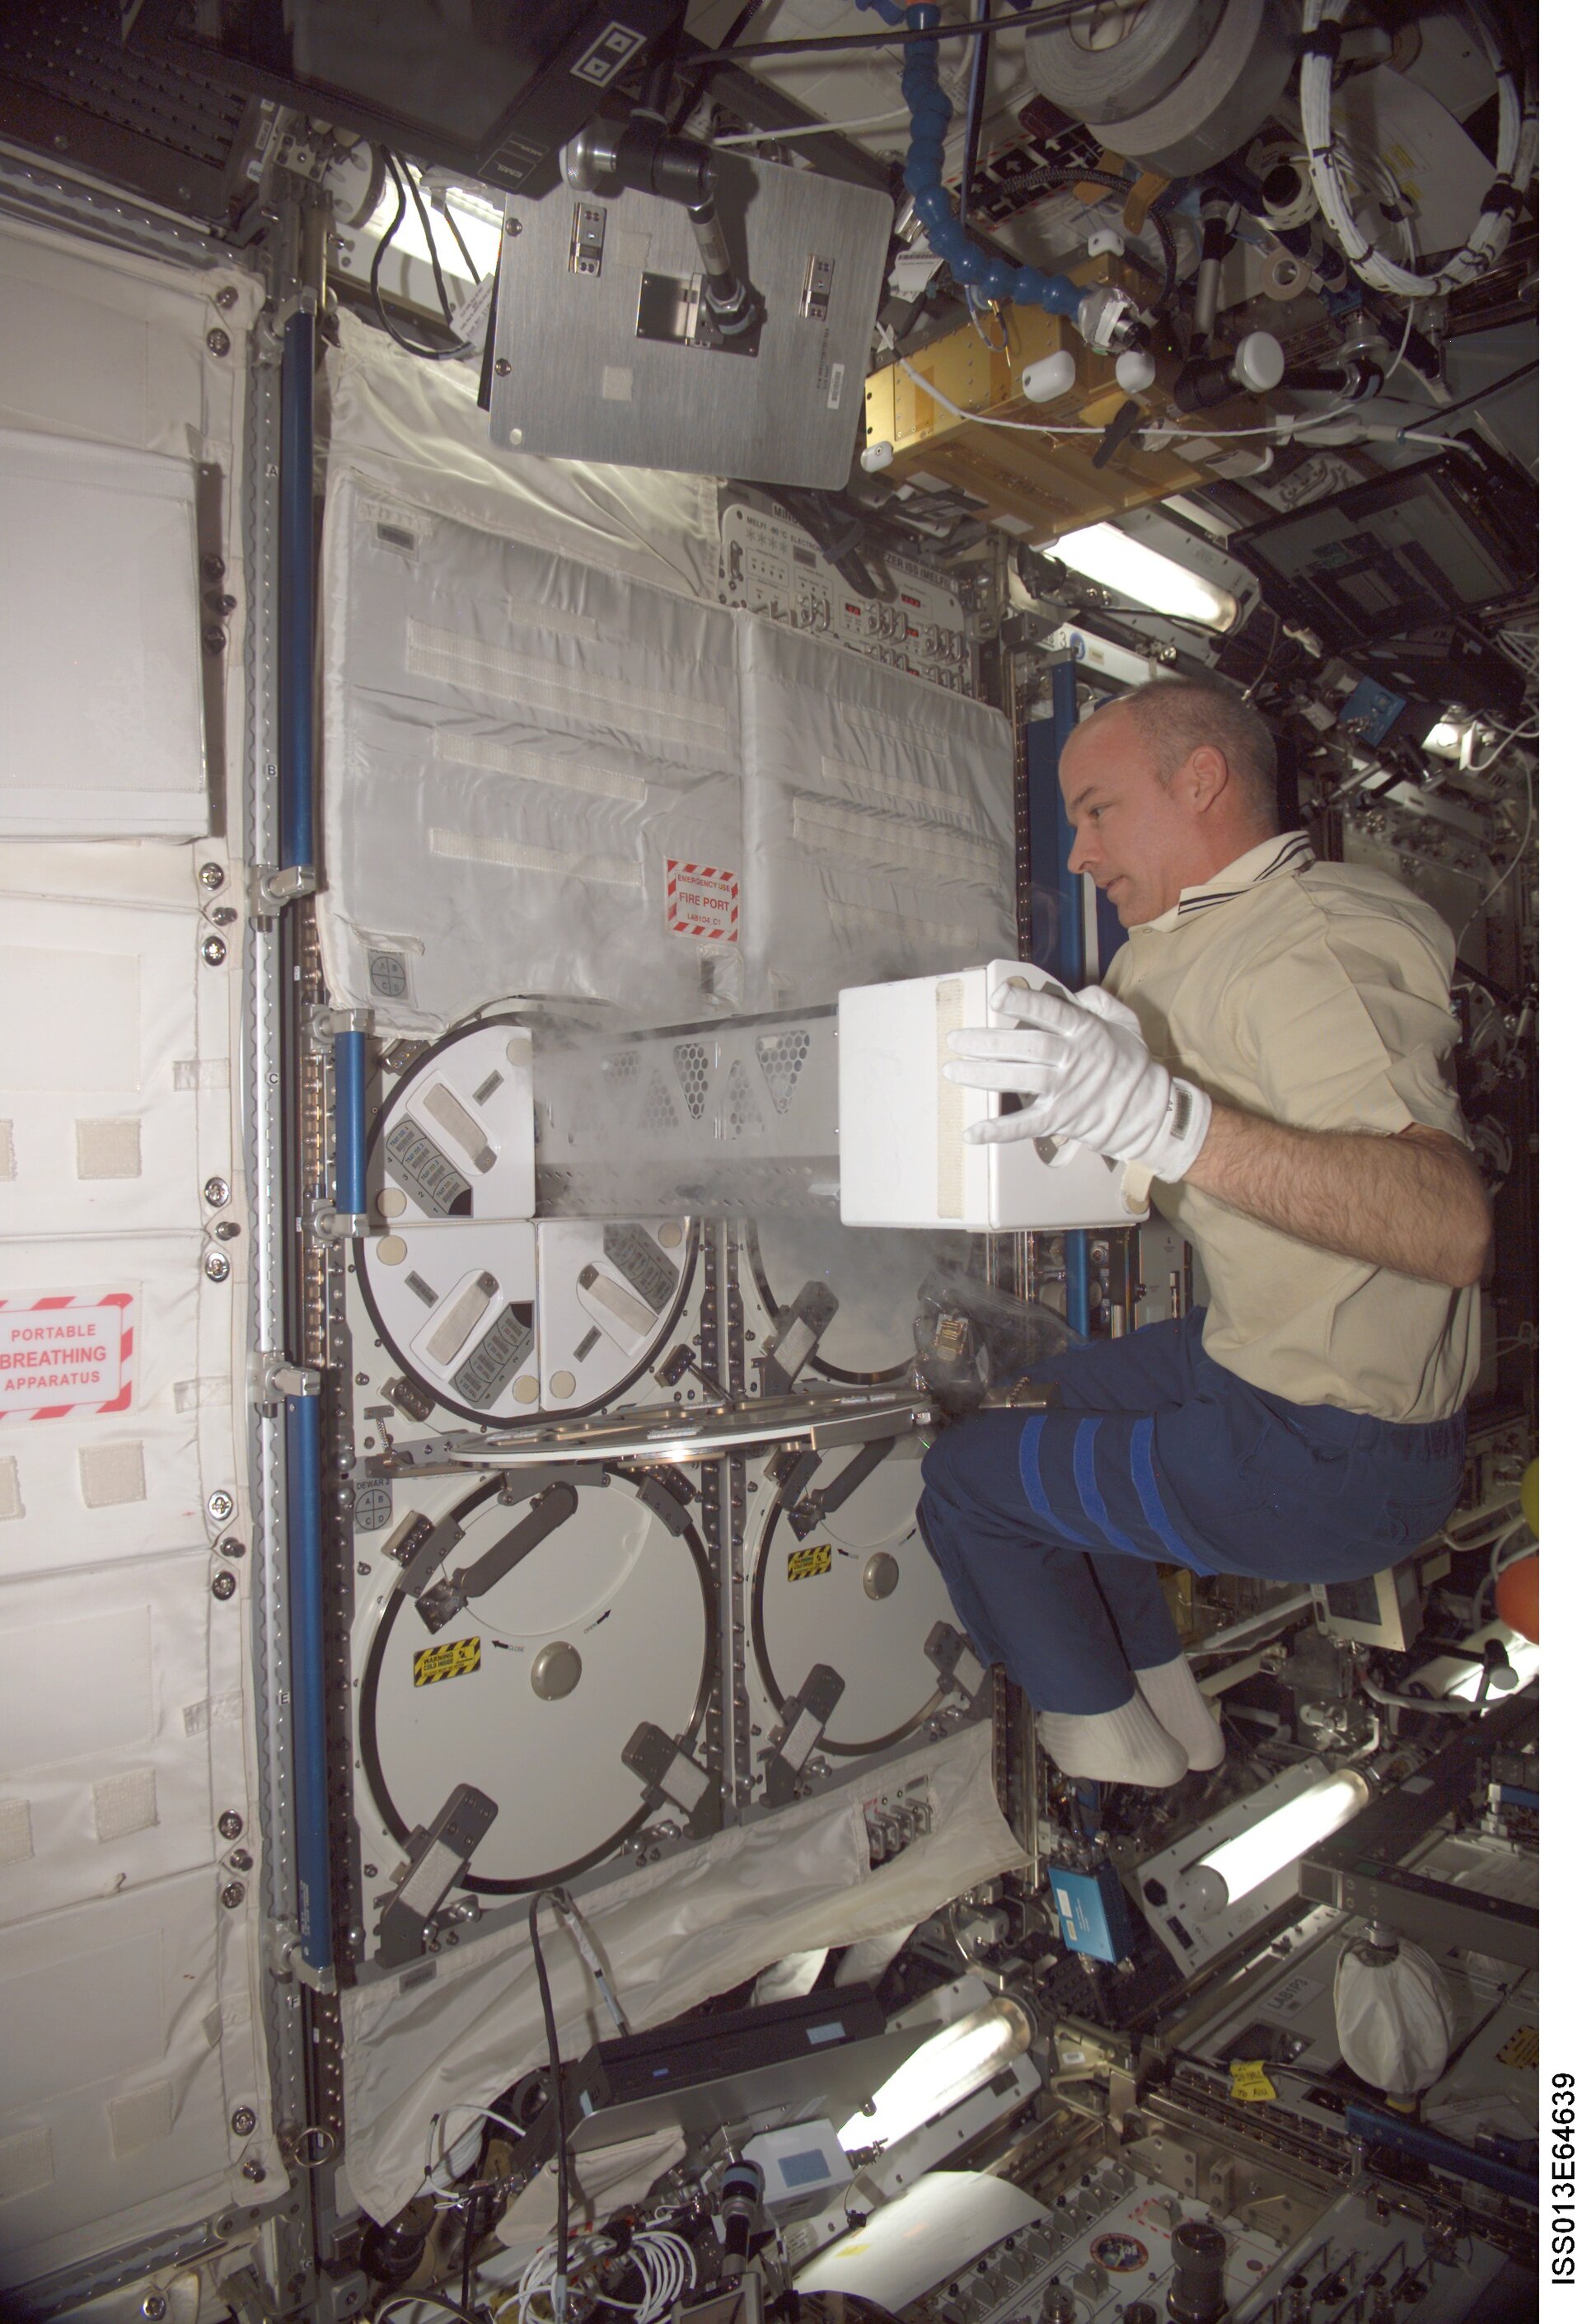 MELFI was installed on ISS in July